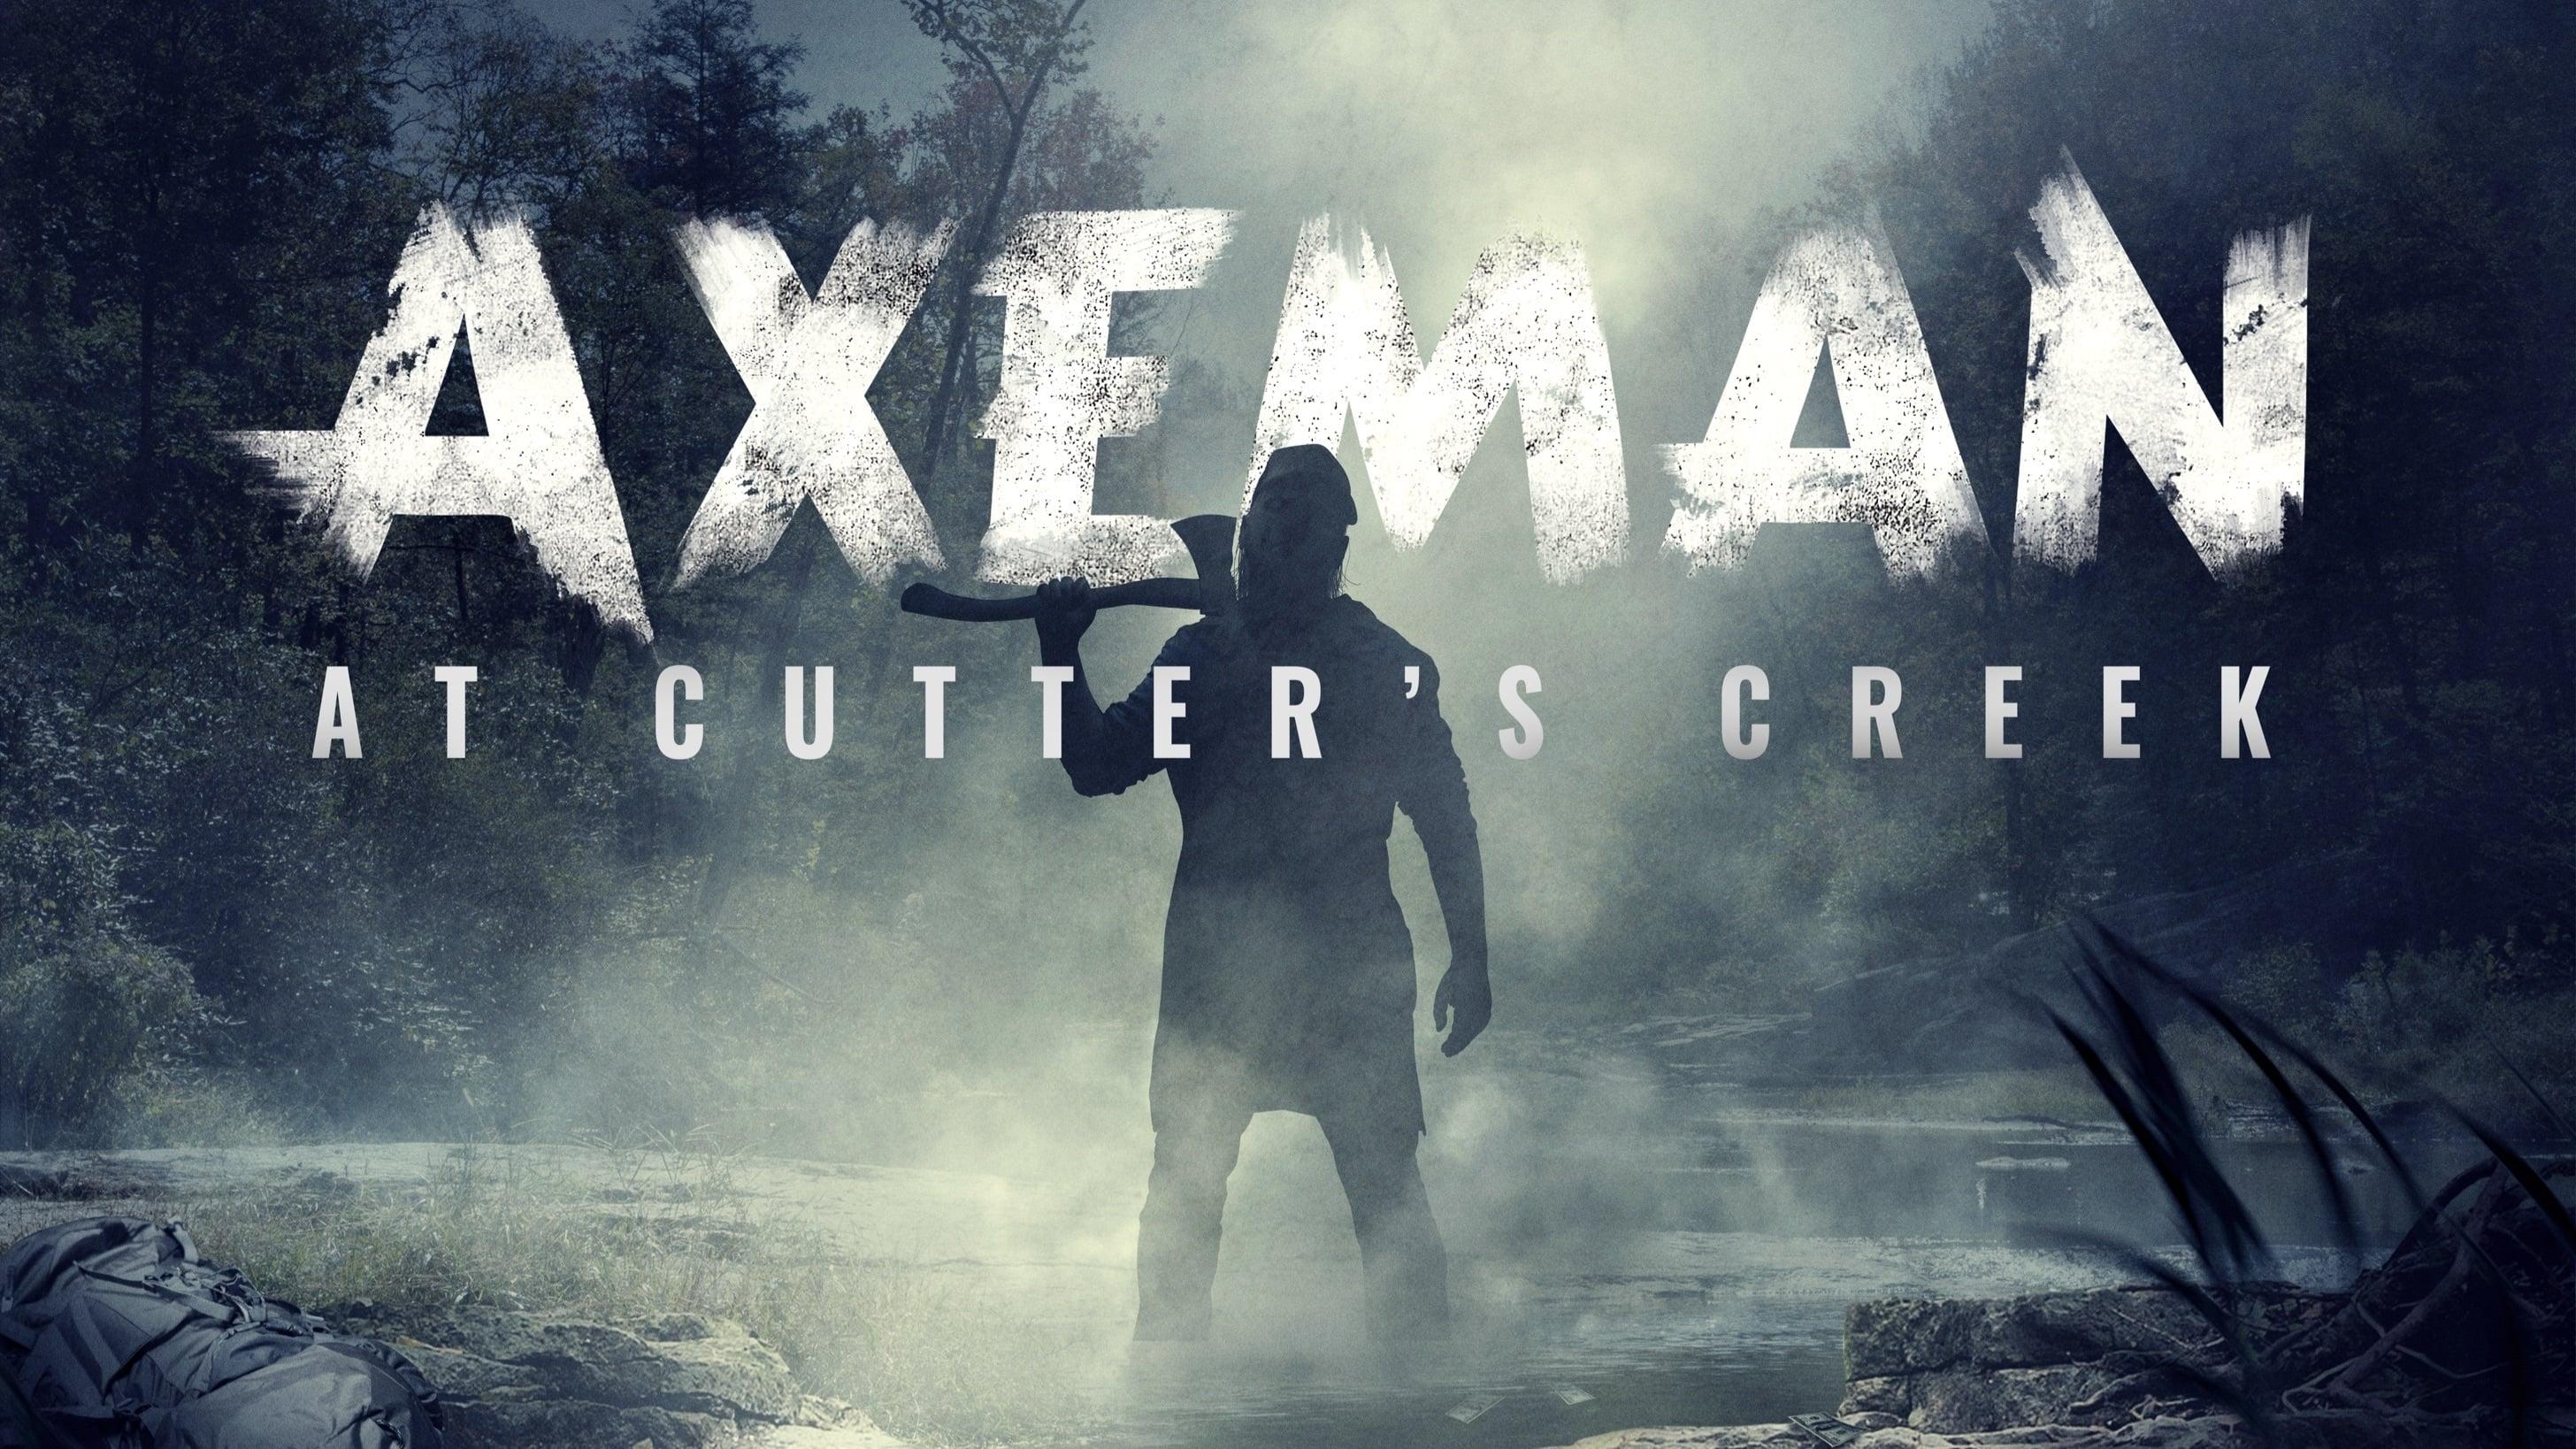 Axeman at Cutters Creek backdrop